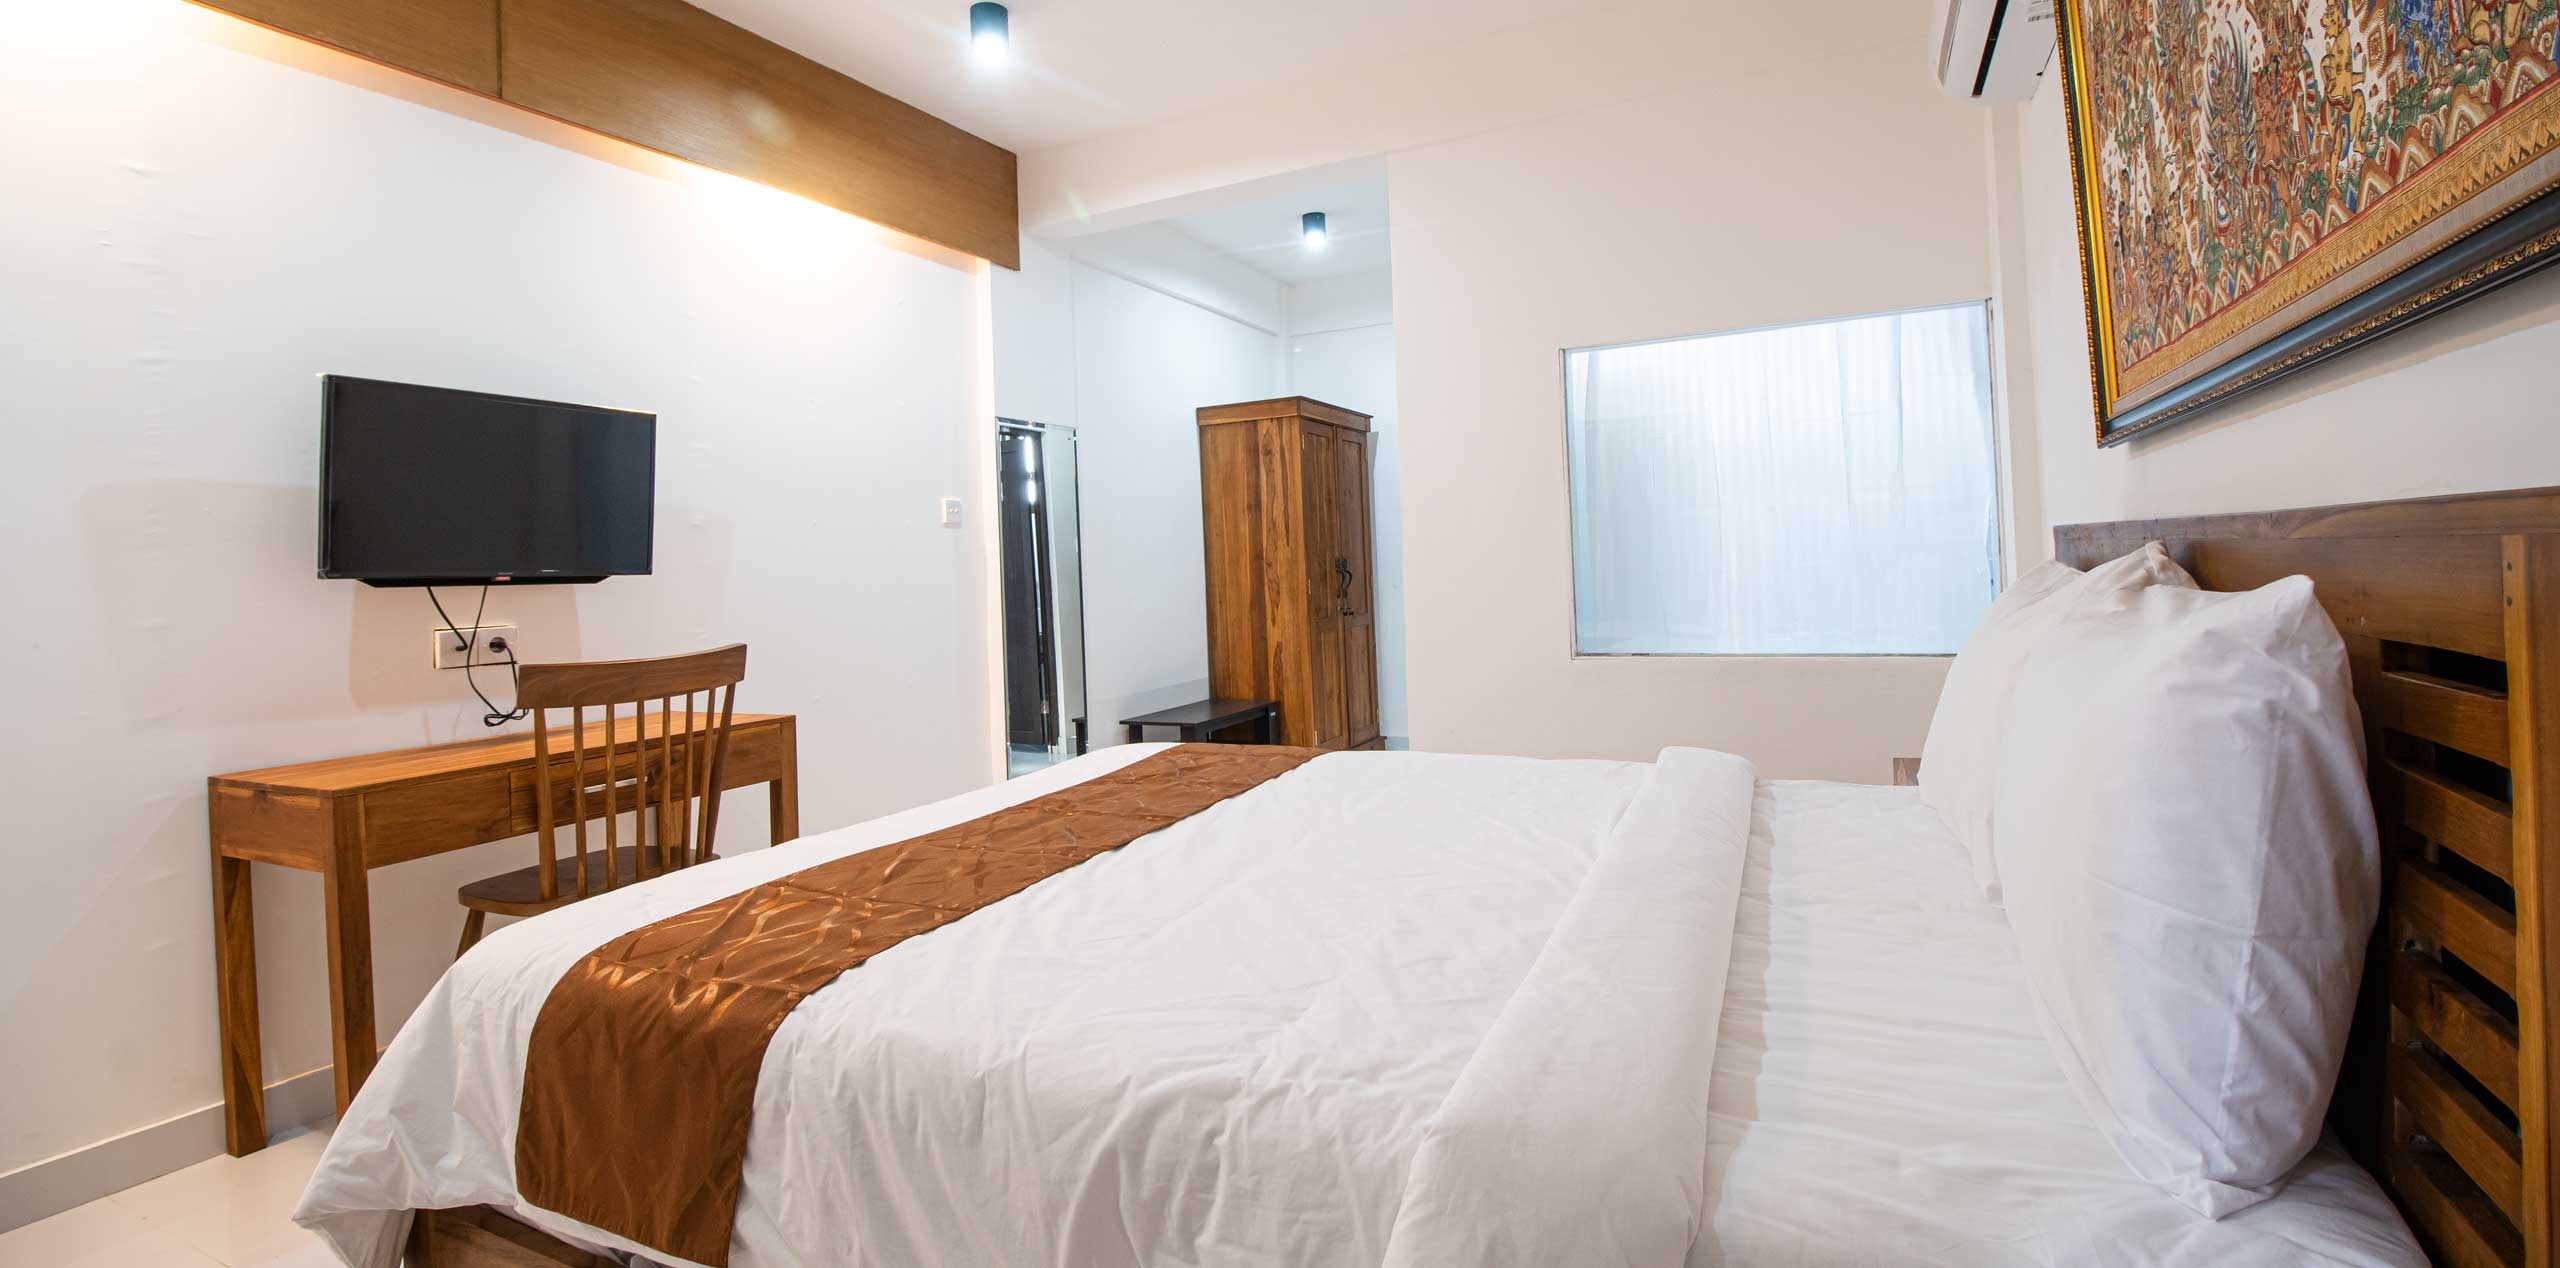 guest rooms, tunjung boutique resort